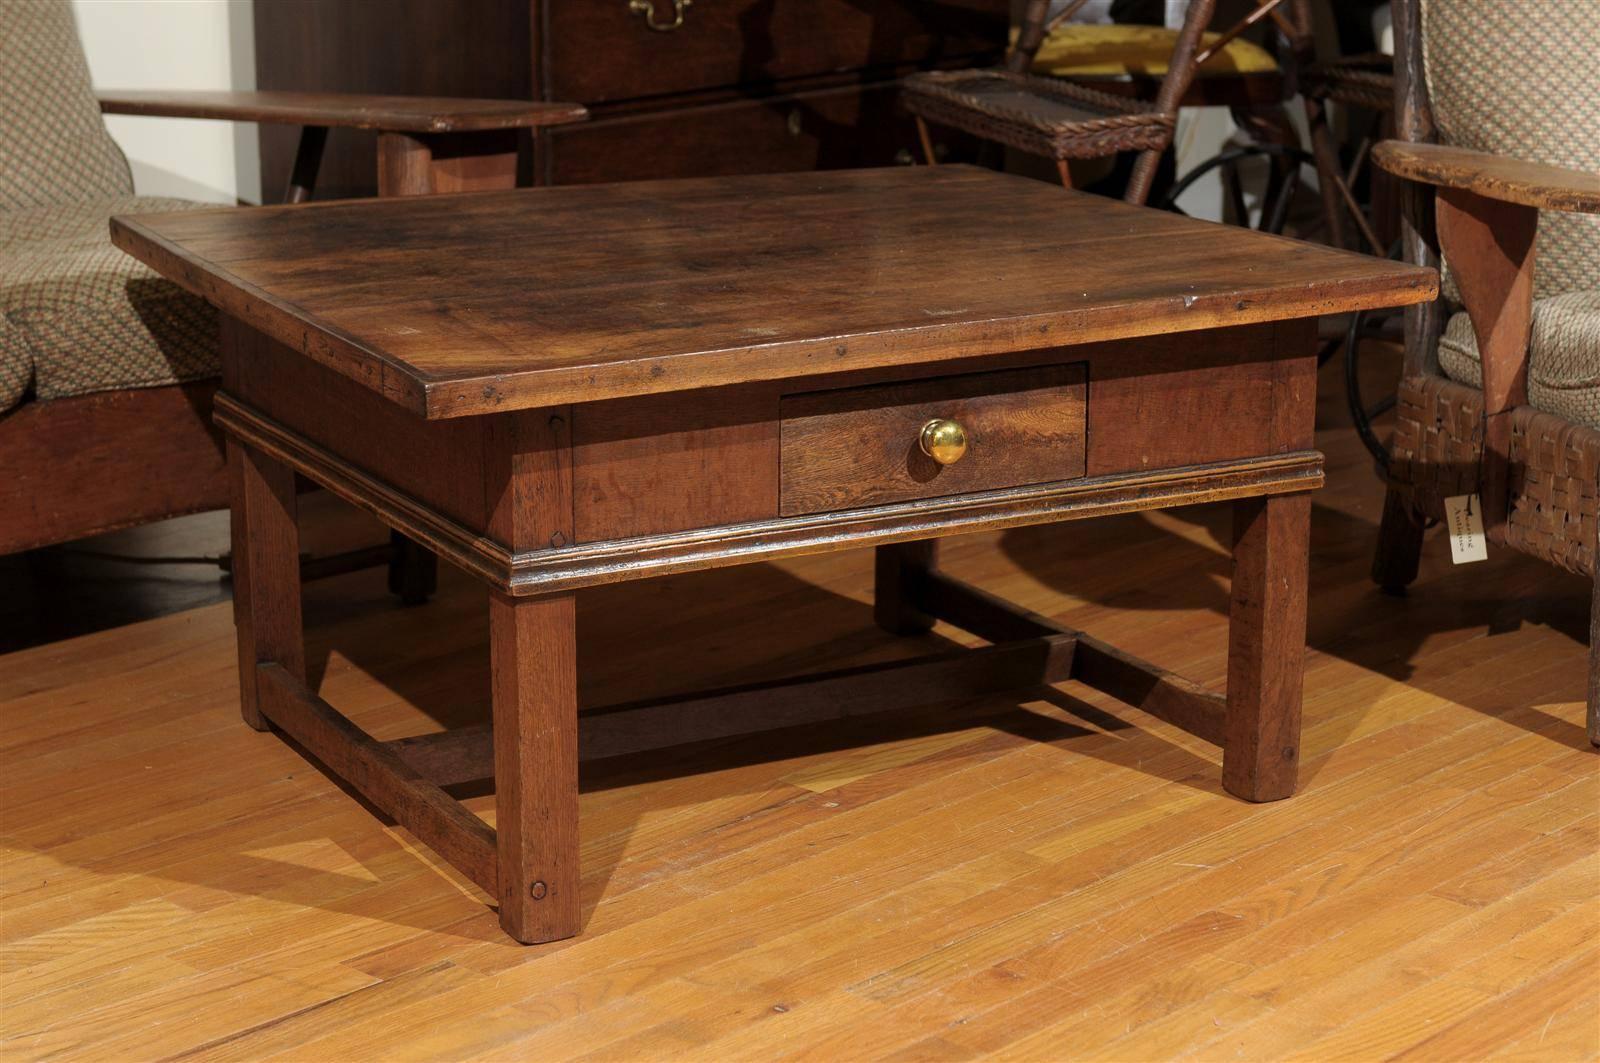 This beautiful table was a Bavarian pub table that was cut down to make a coffee table. The top is walnut and the original base is oak. There is one drawer with a brass knob.
 